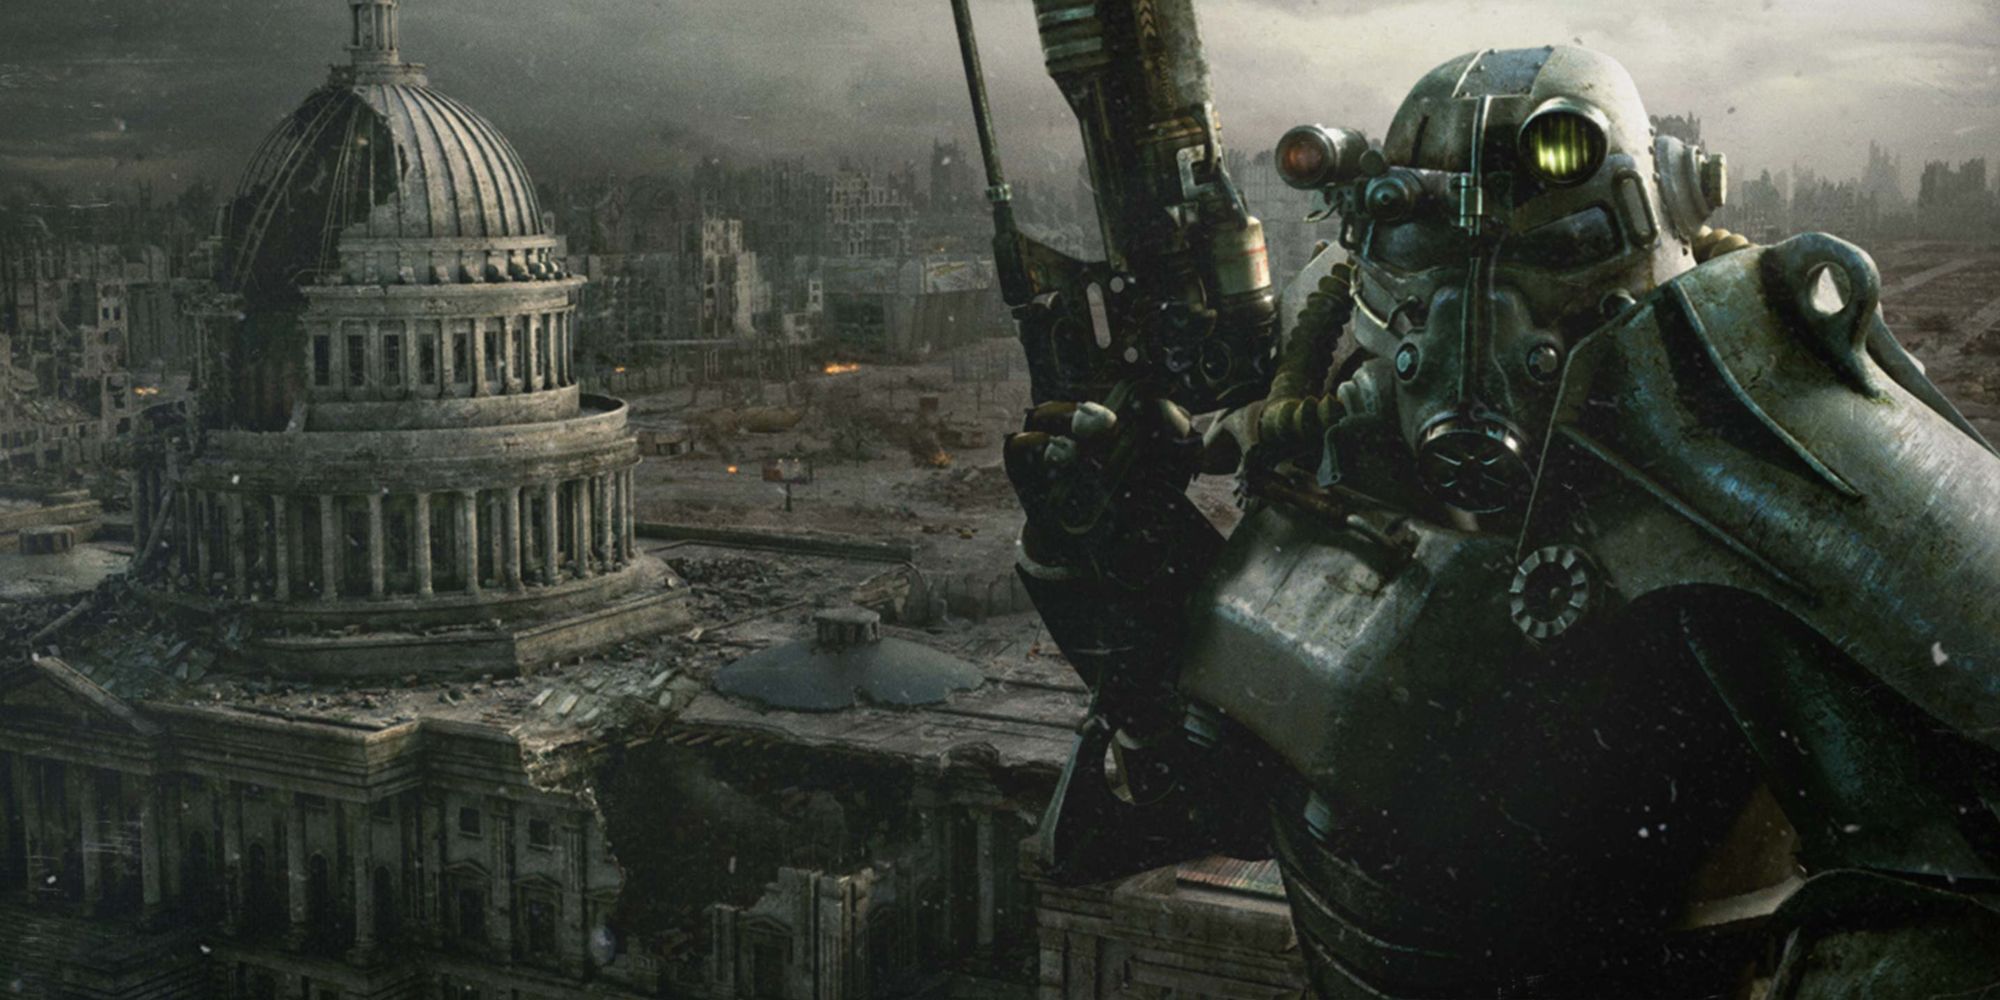 A person in power armor standing above the remains of Washington D.C.